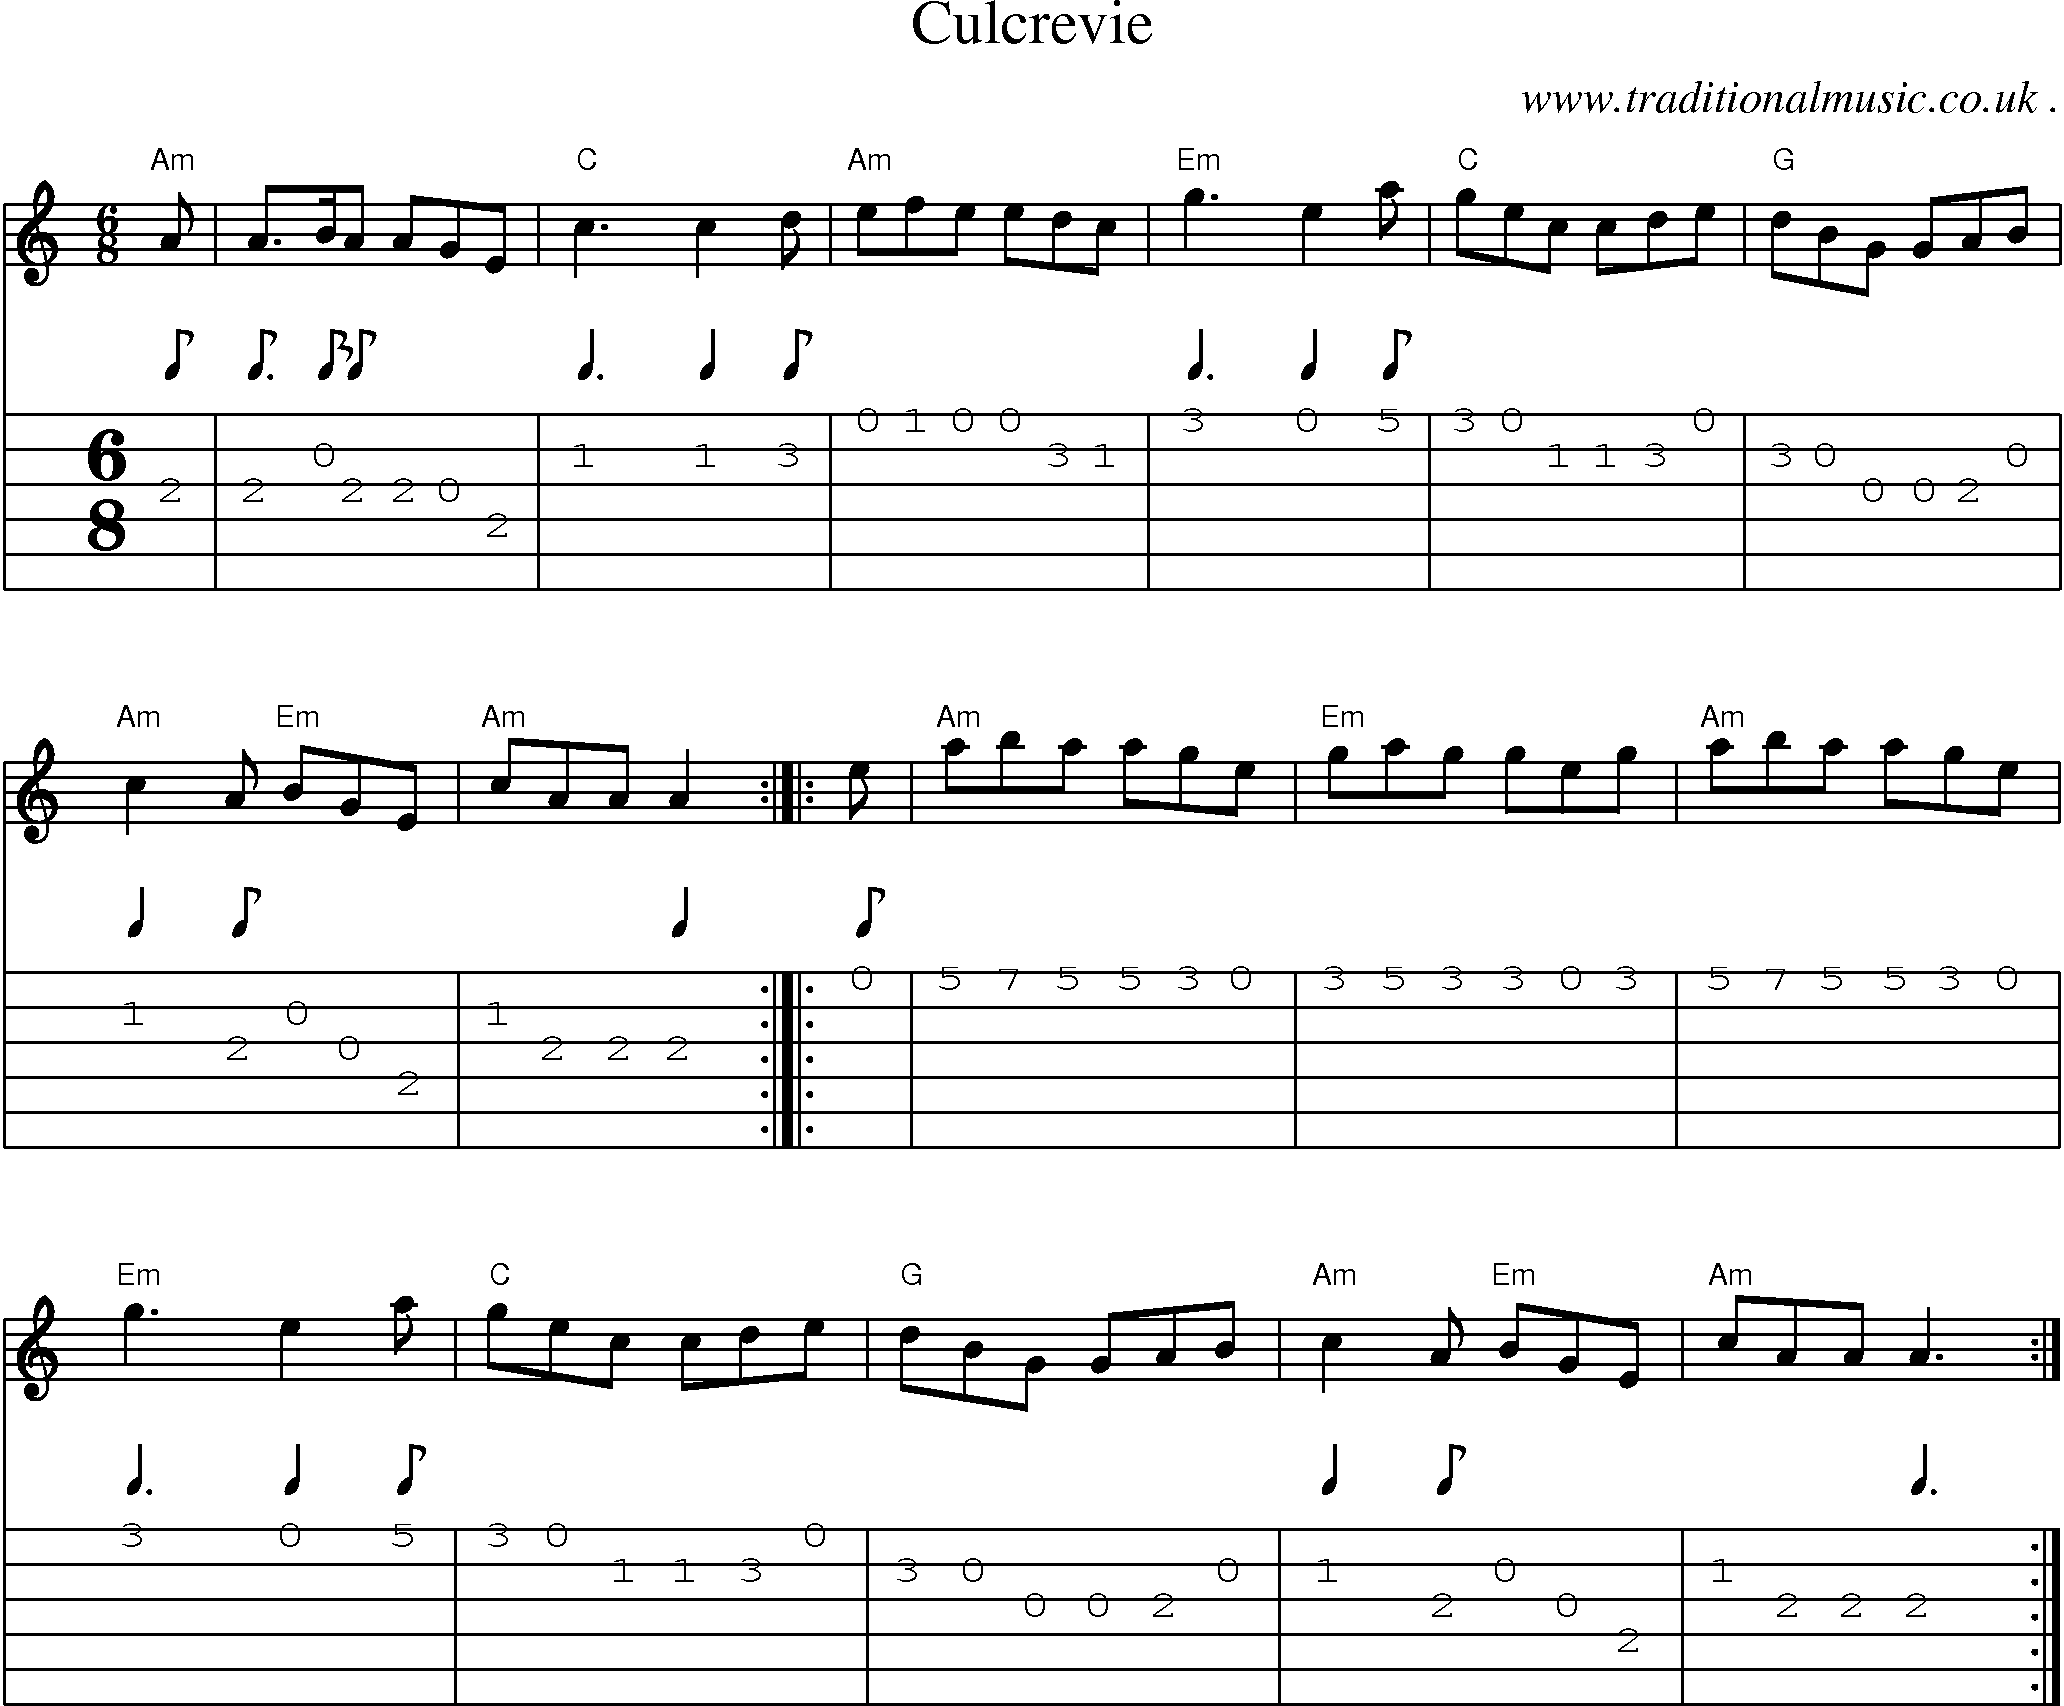 Music Score and Guitar Tabs for Culcrevie